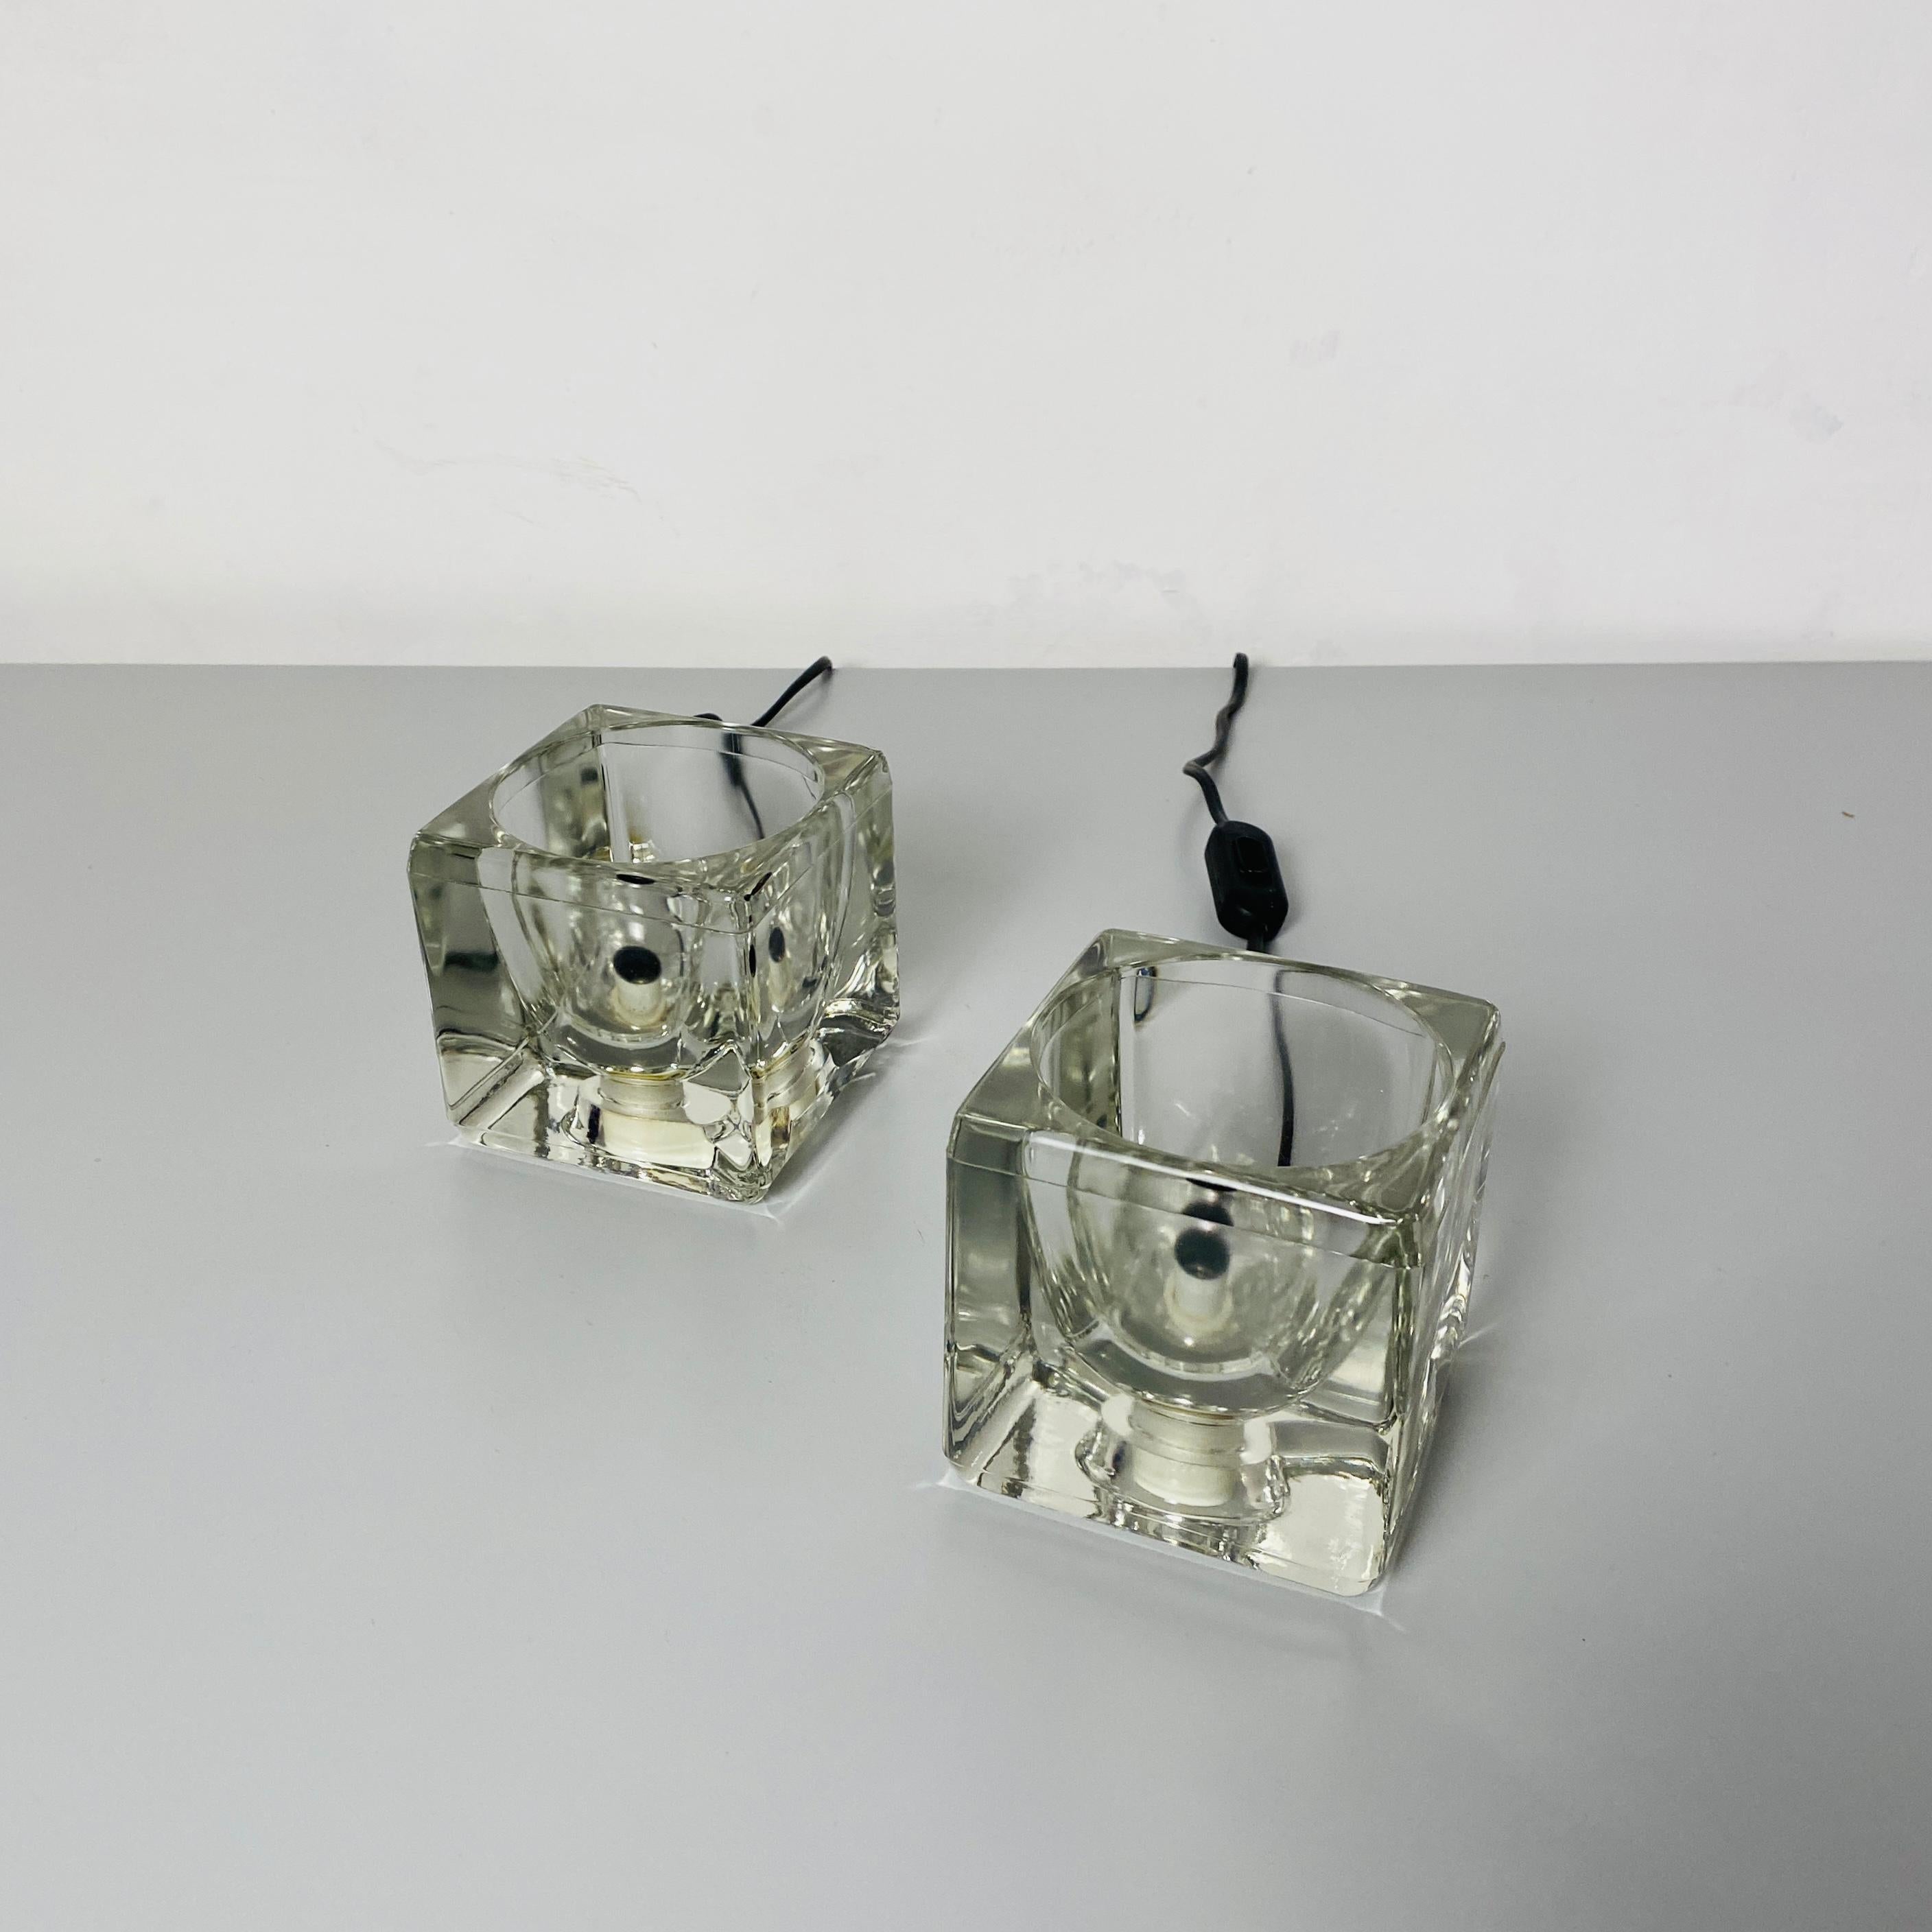 Italian Mid-Century Modern thick transparent glass bedside lamps, 1980s
Pair of square shaped bedside lamps in thick and transparent glass, internal lamp holder.

Good conditions

Measures: 10 x 10.5 H cm.